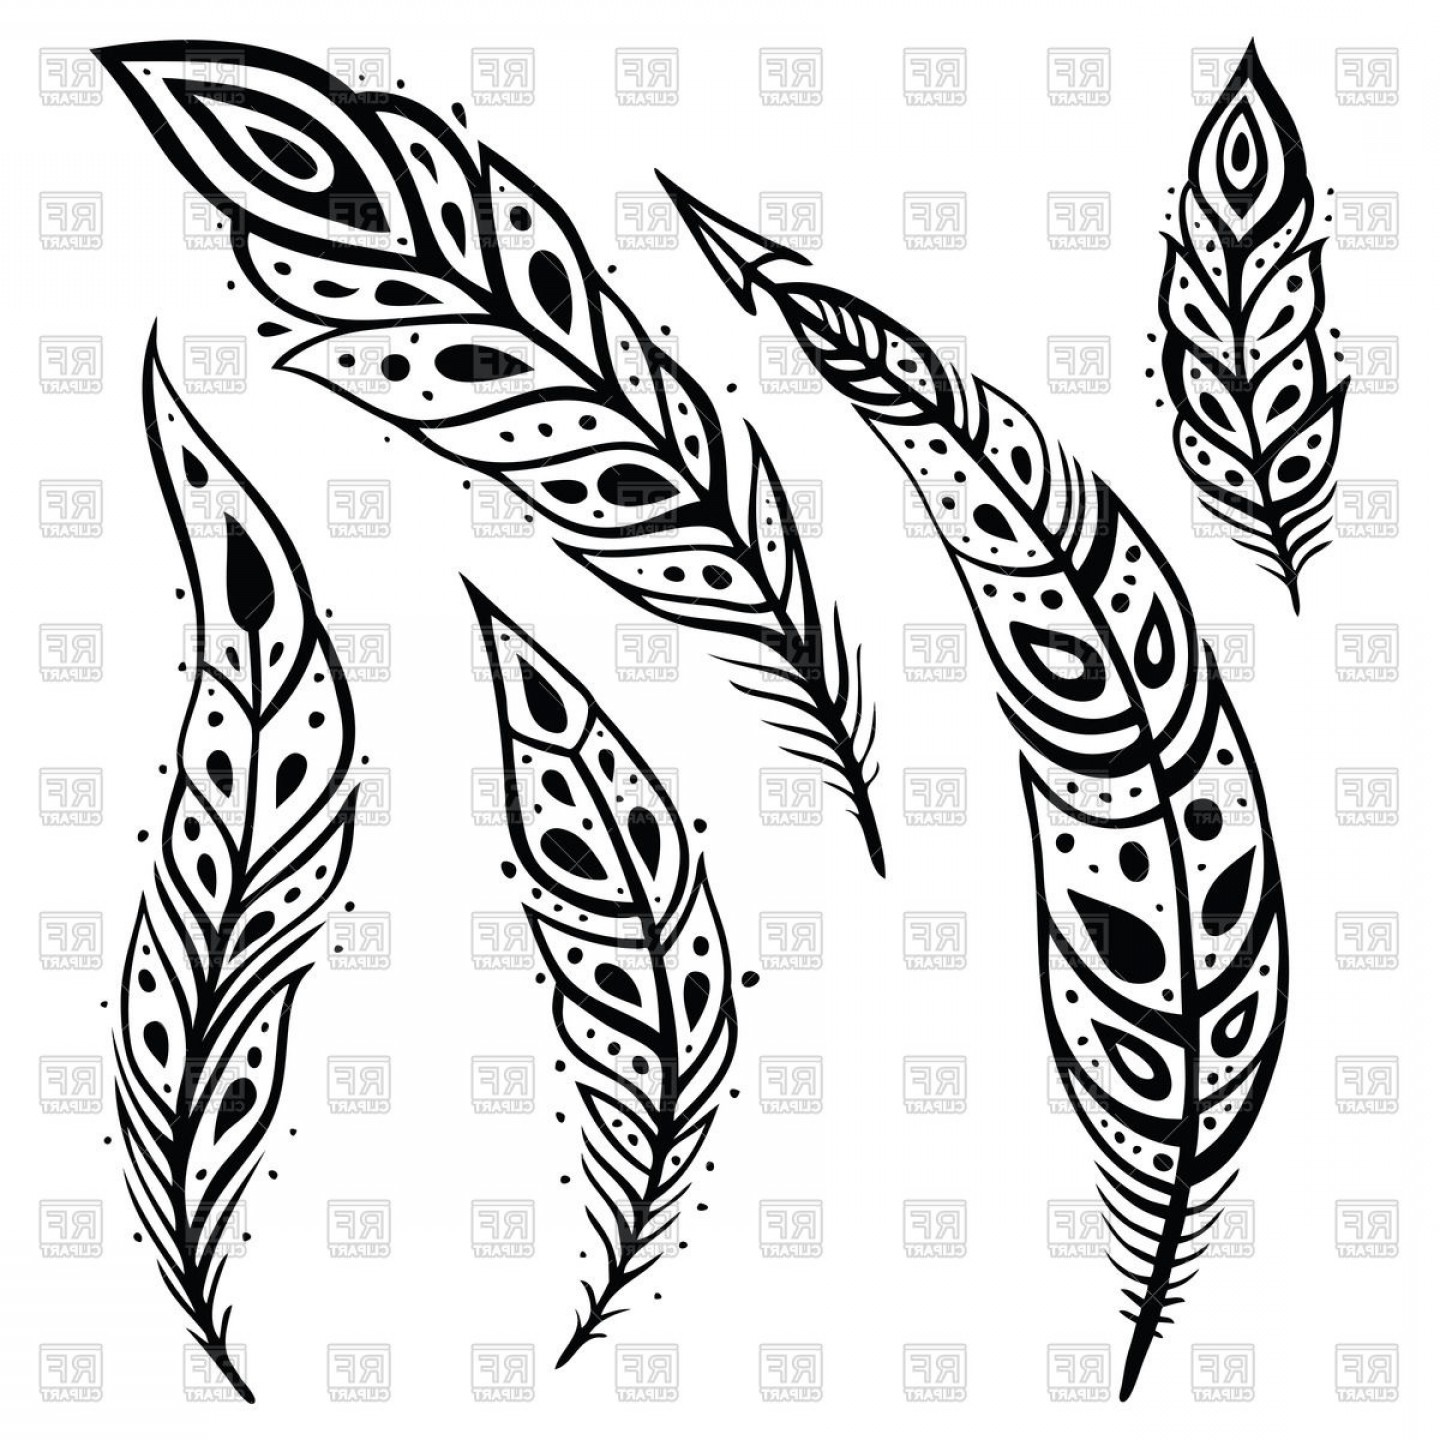 Stylized Decorative Black White Feathers Vector Clipart.